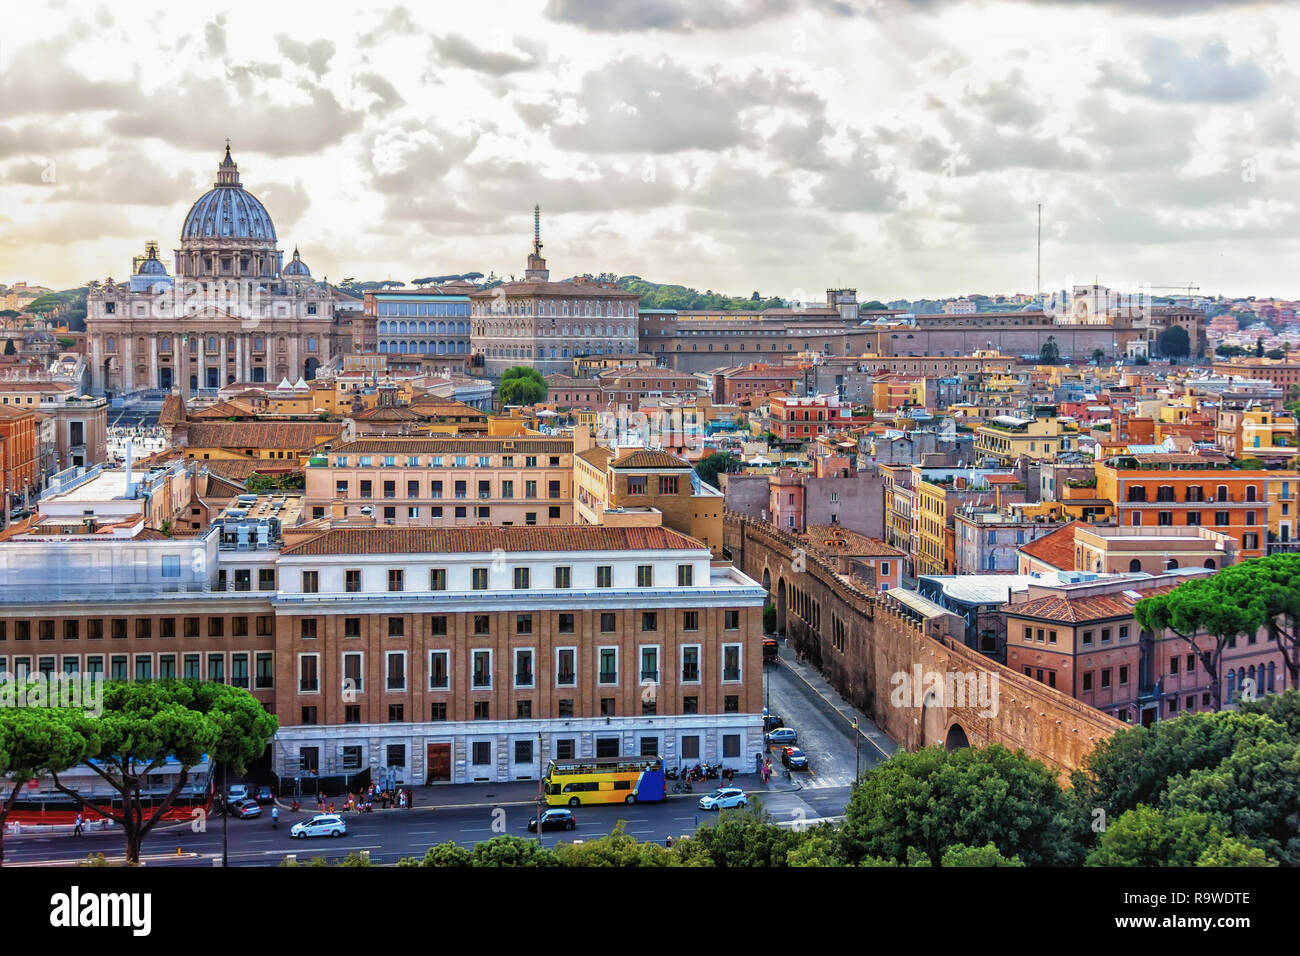 Vatican City and St Peter's Cathedral view, Rome, Italy Stock Photo